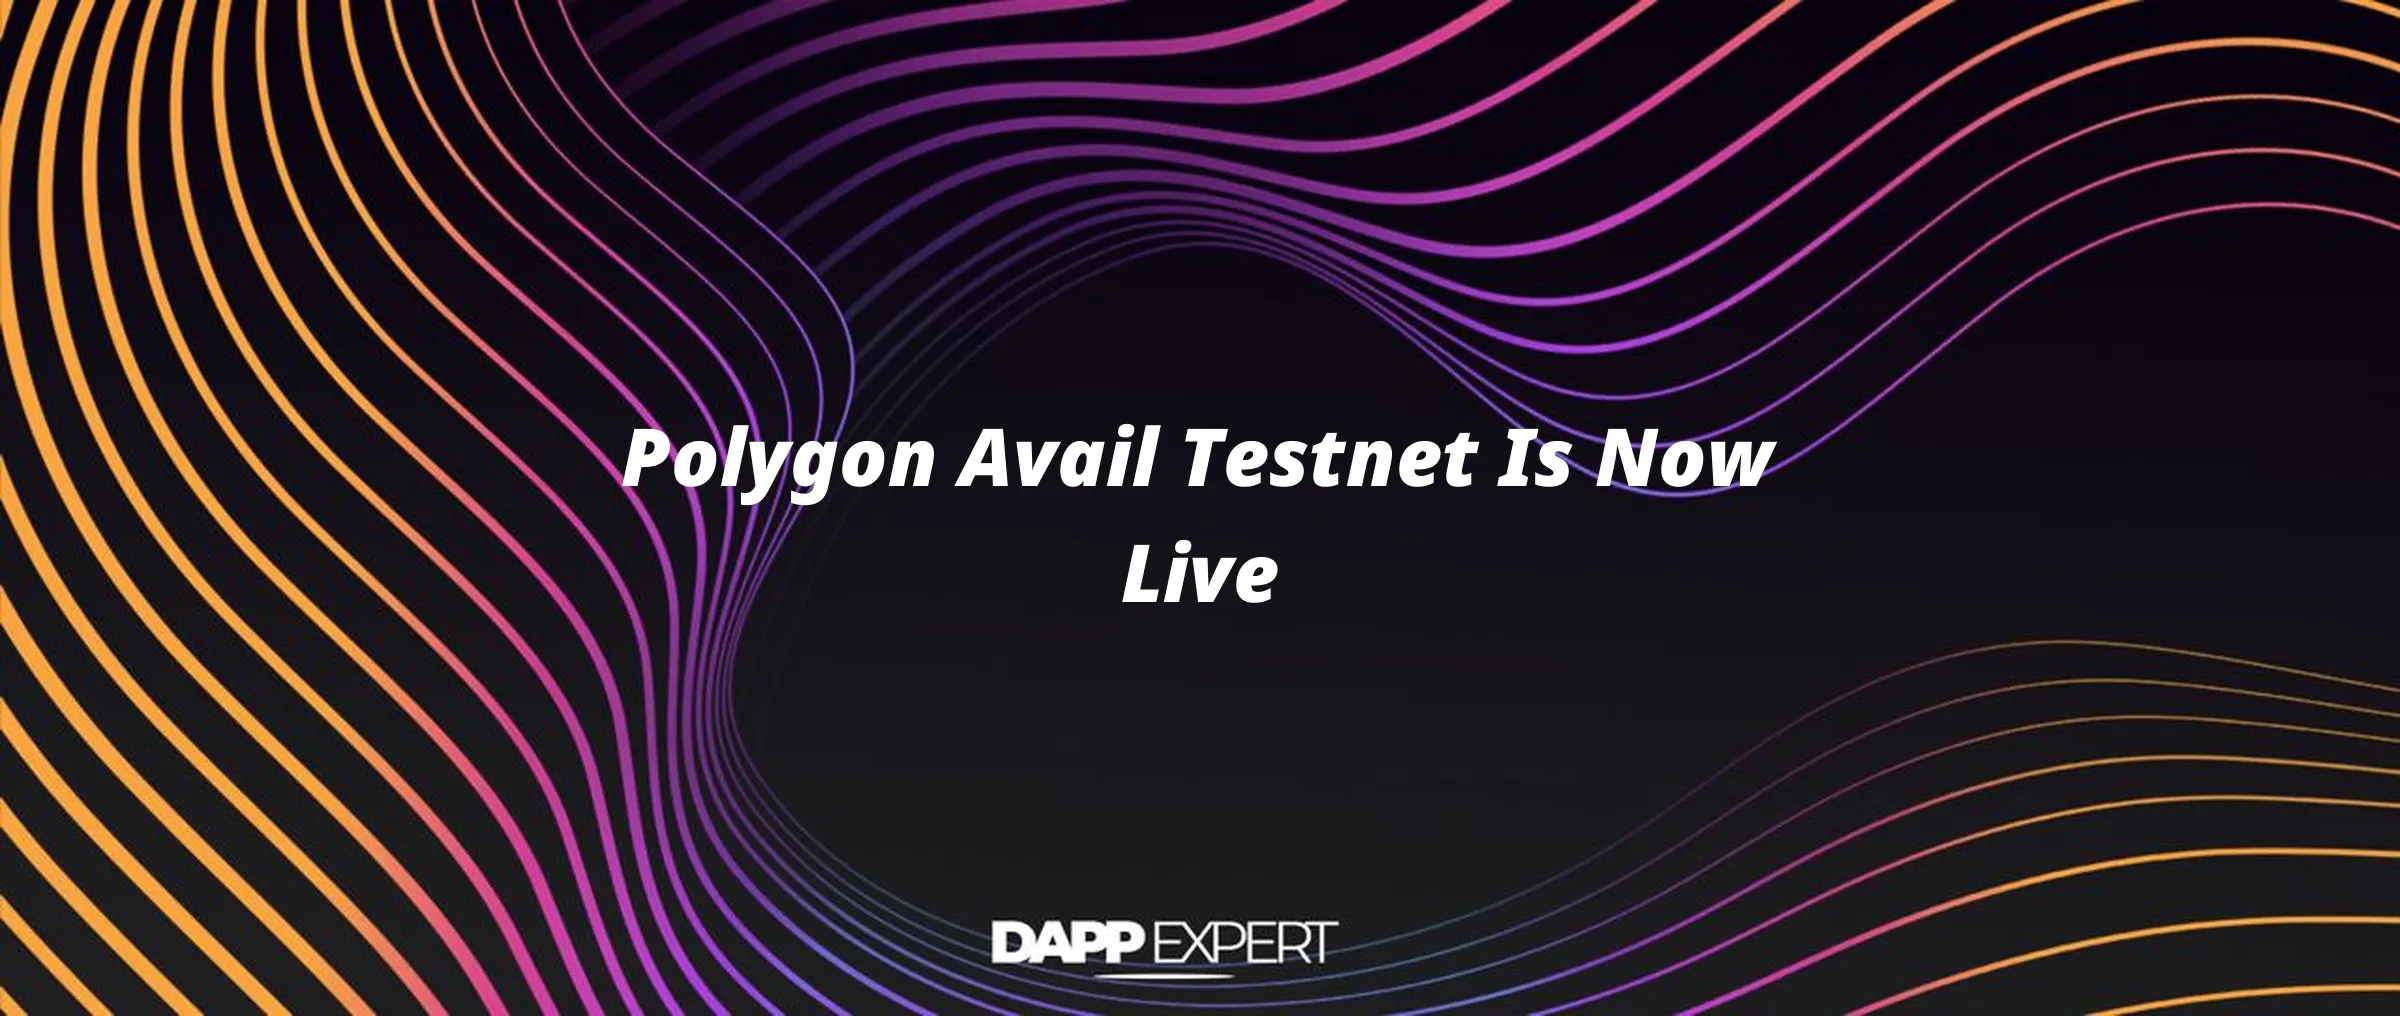 Polygon Avail Testnet Is Now Live